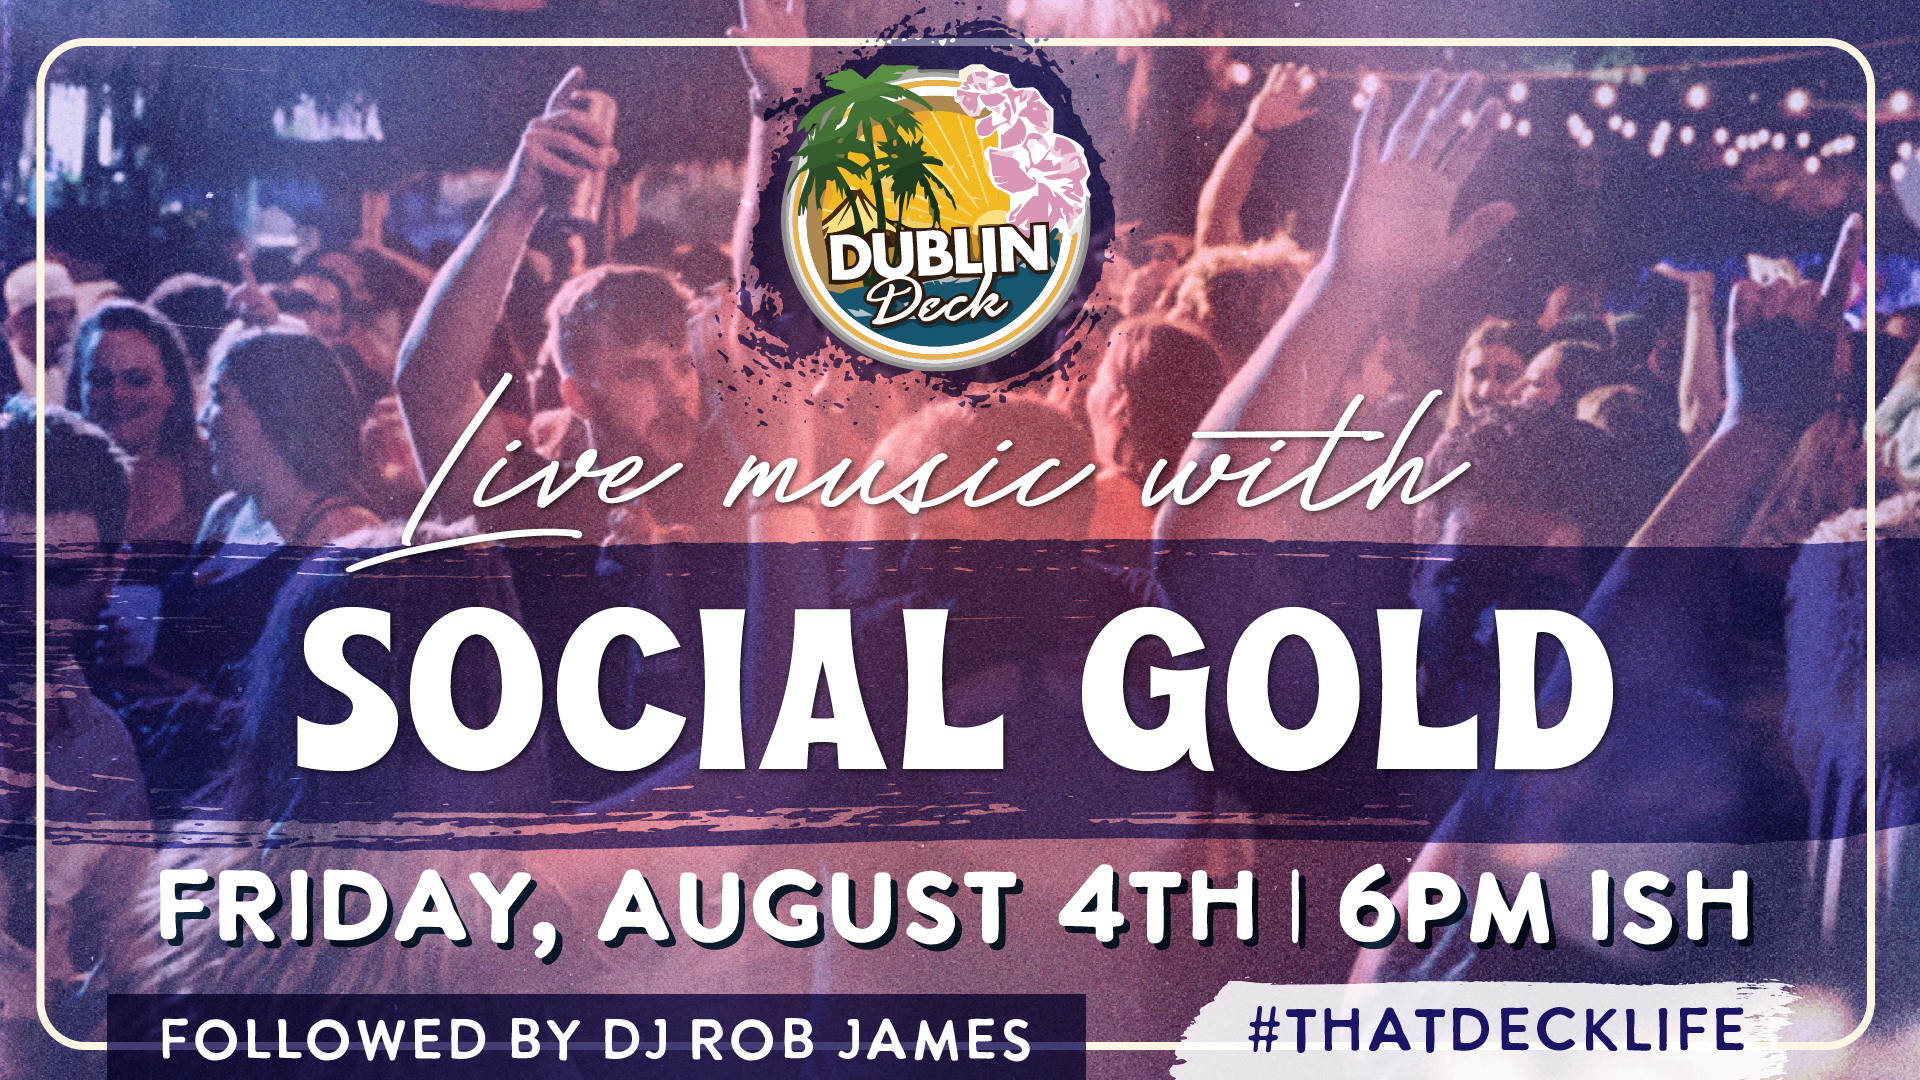 Rock out with Social Gold at Dublin Deck! Music begins at 6PM-ish